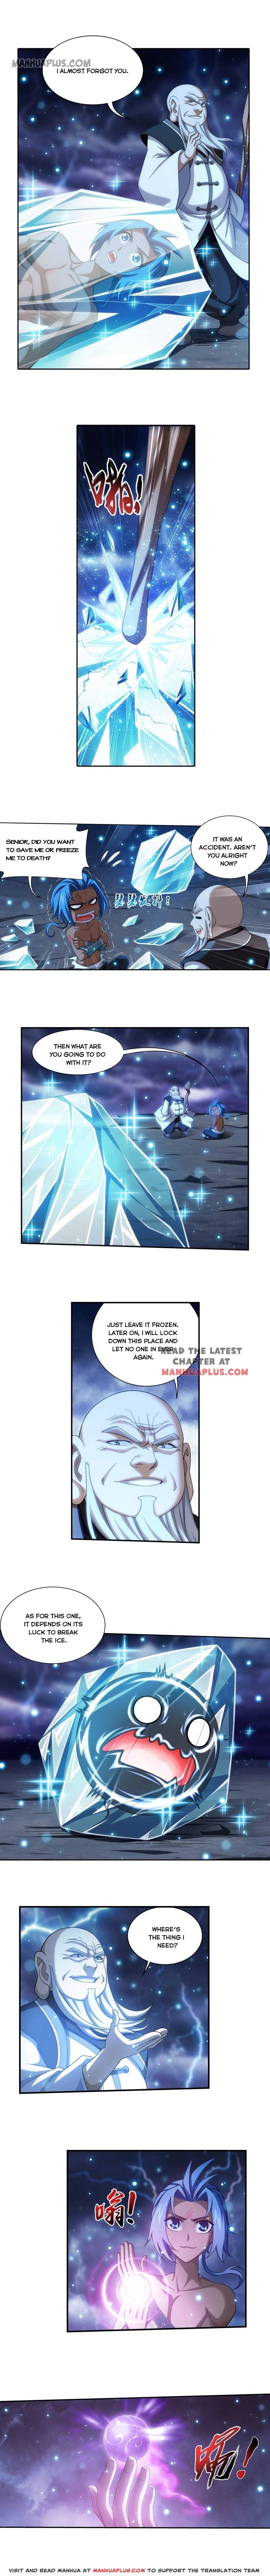 The Great Ruler Chap 180